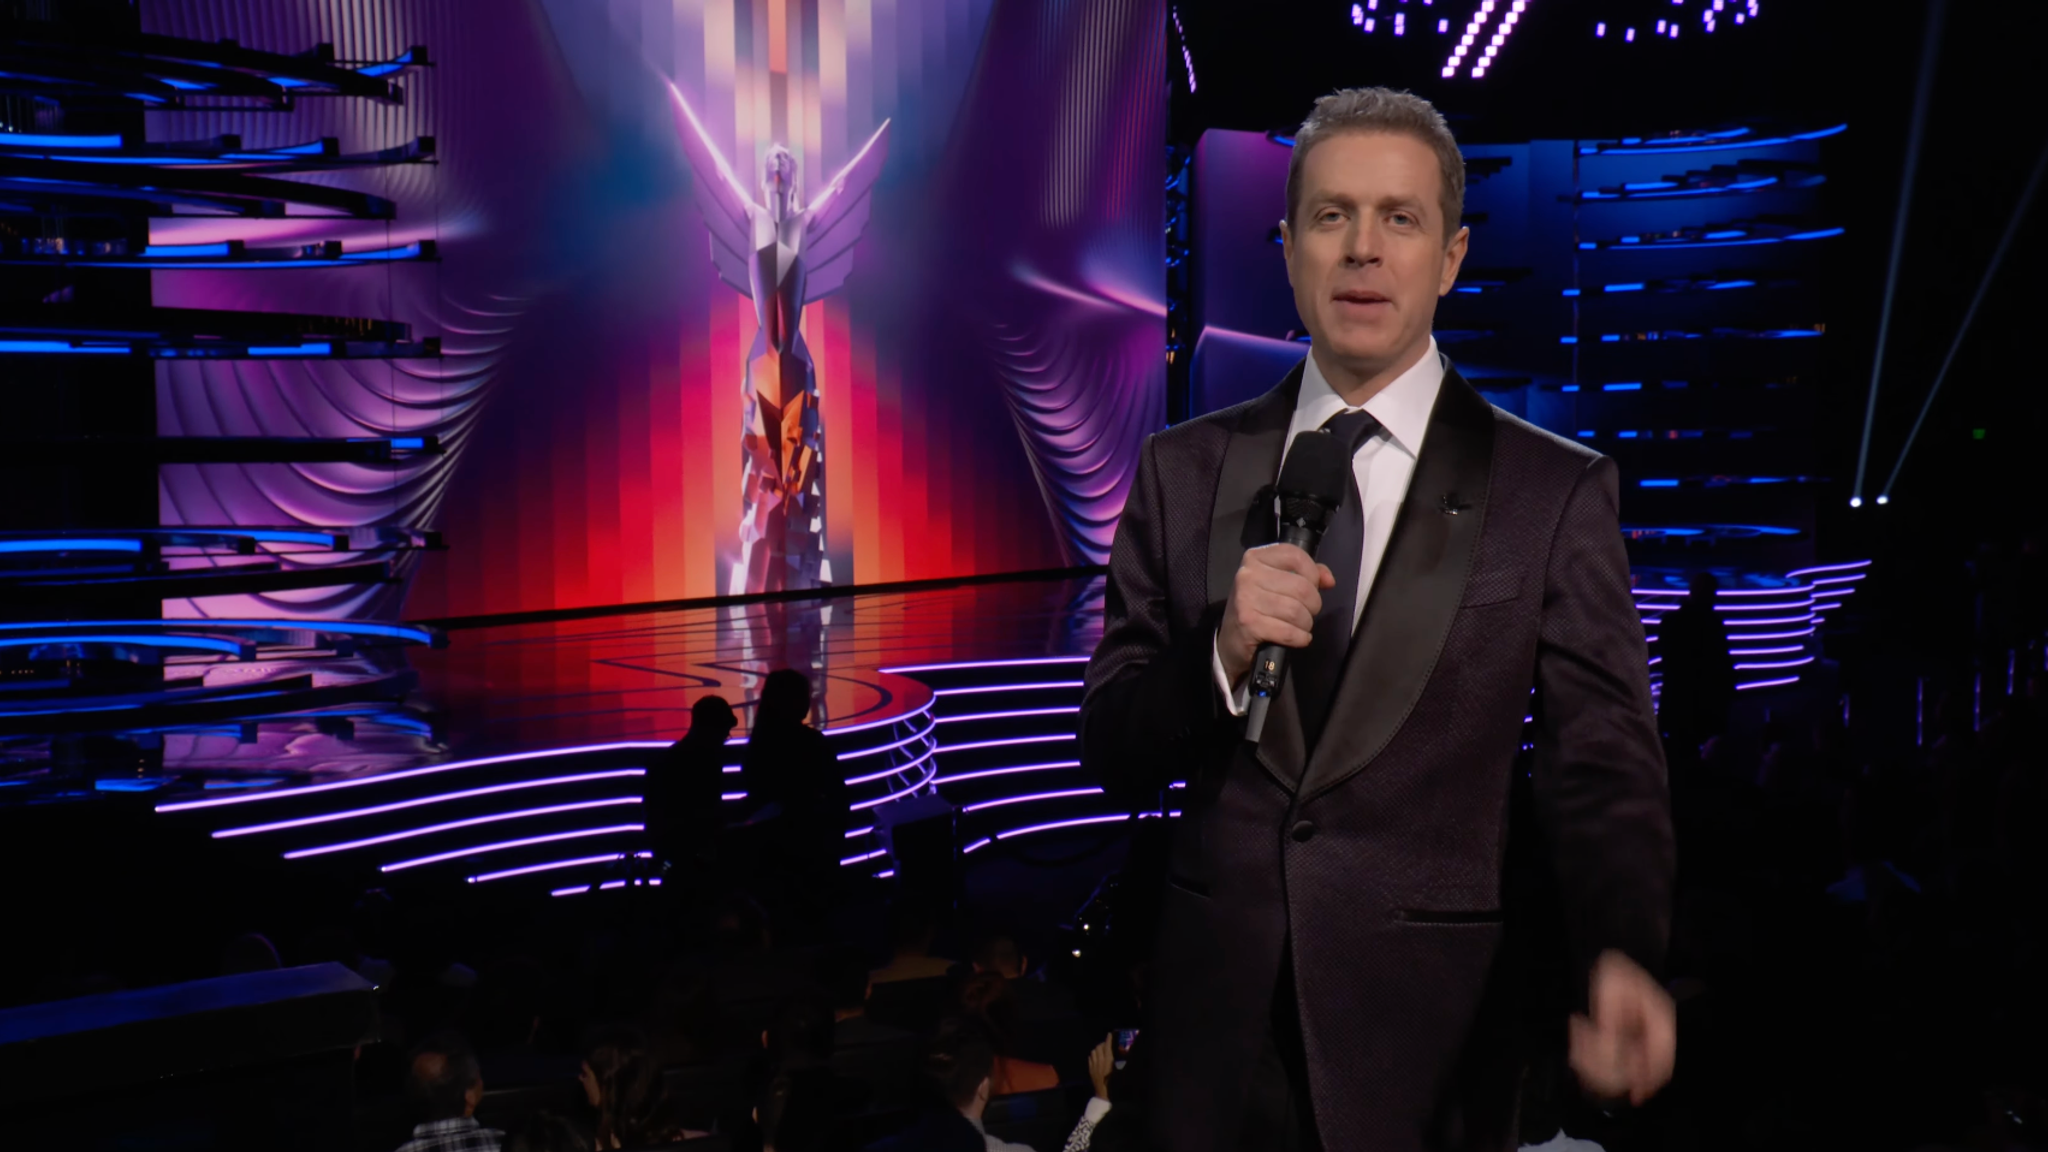 Host and organiser Geoff Keighley. Pic: Game Awards/YouTube